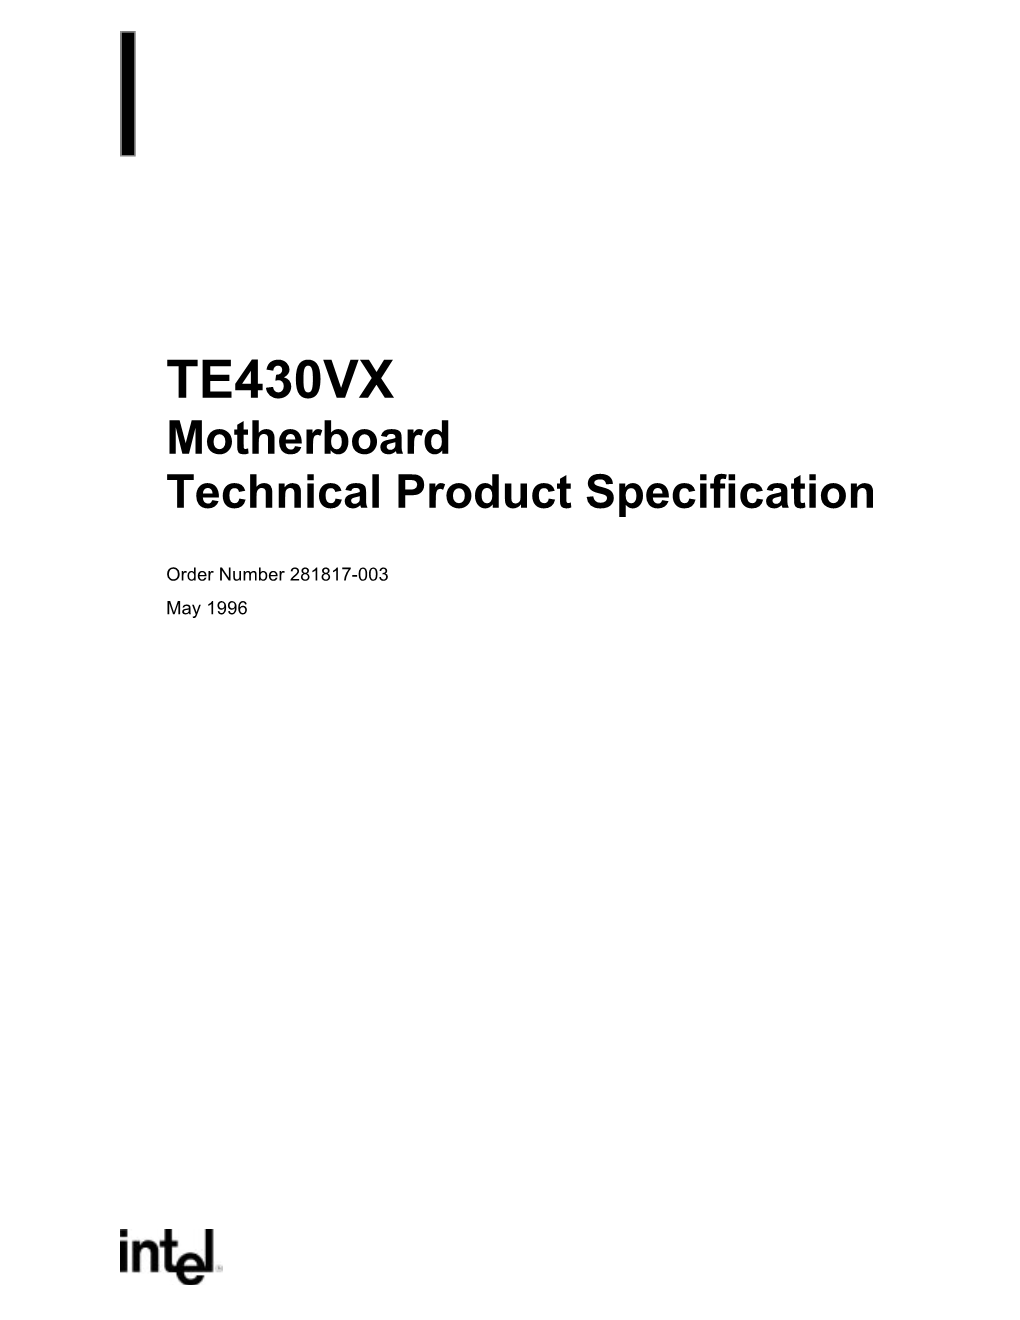 TE430VX Motherboard Technical Product Specification